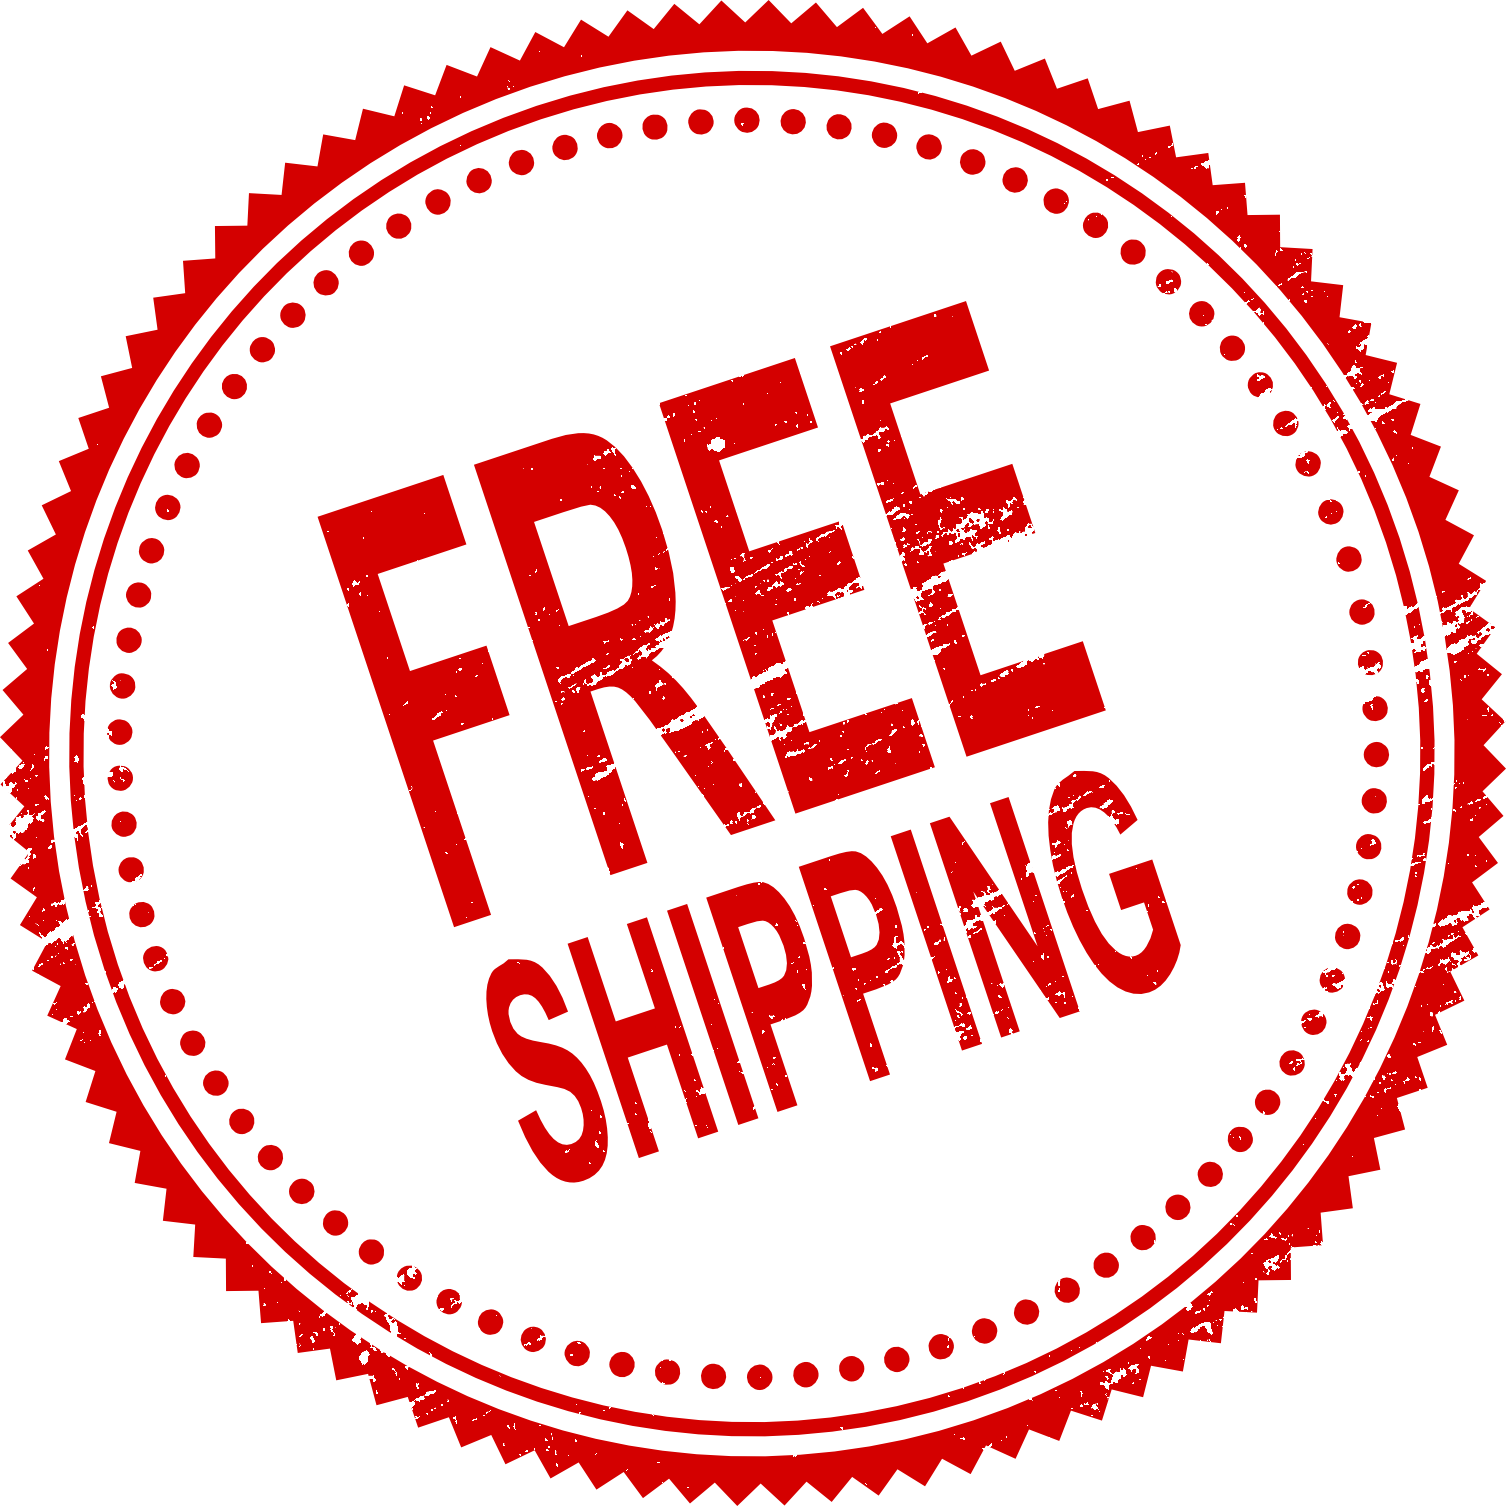 Free Shipping Png - Free Download (Free Shipping Stamp 2.png), Transparent background PNG HD thumbnail